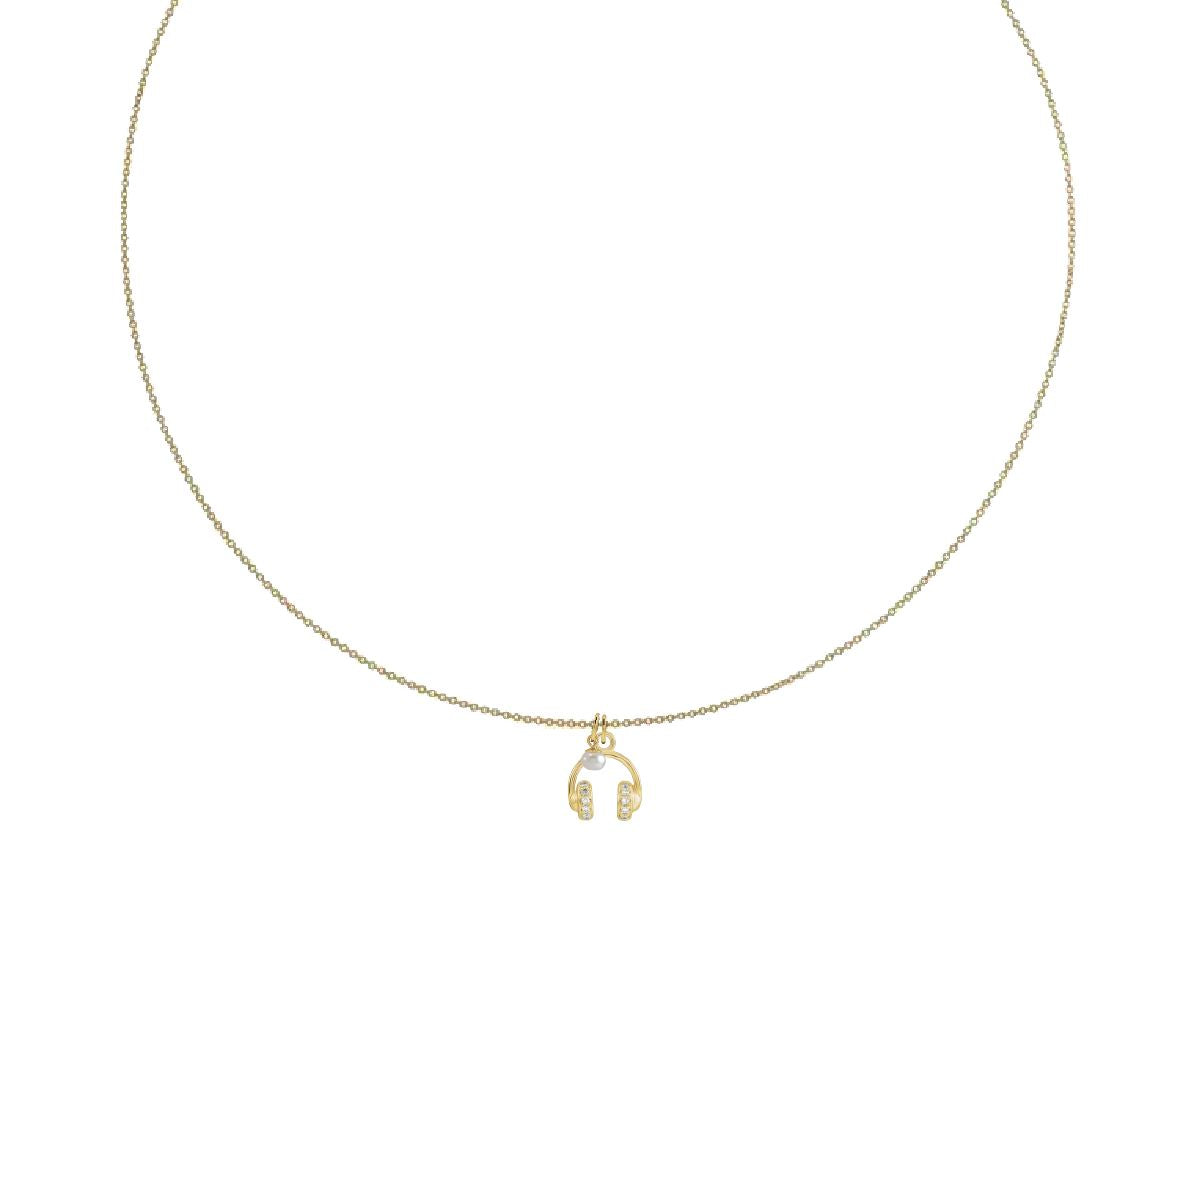 Charm Collection - For the Music Lover Robyn Canady Charm + 14K Gold Filled Chain Add a Pearl 